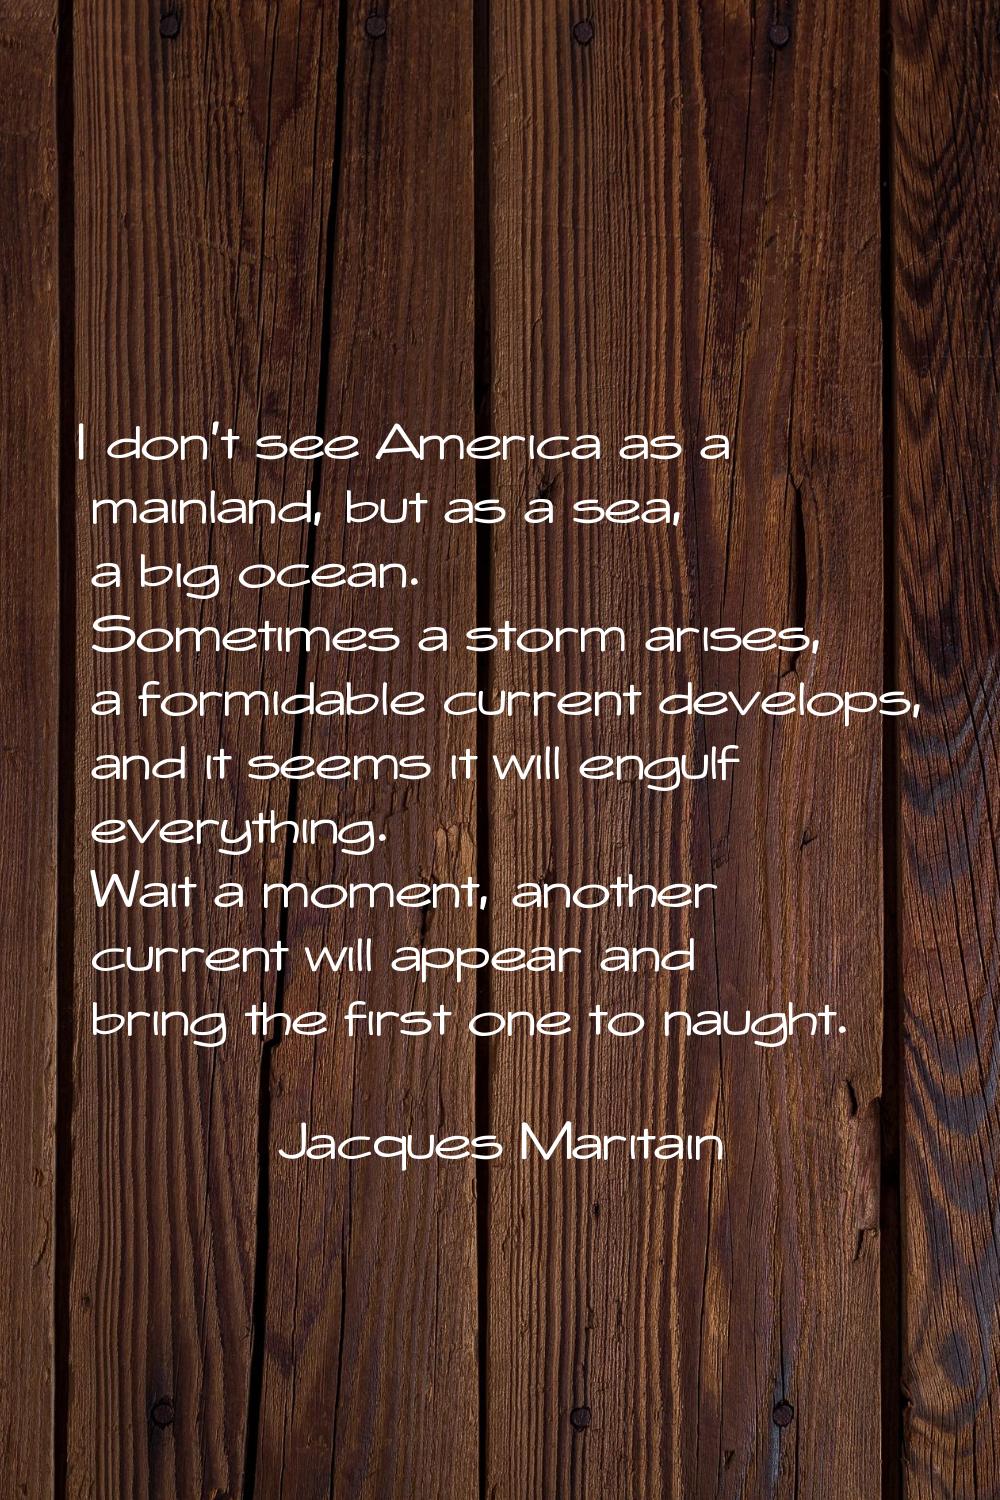 I don't see America as a mainland, but as a sea, a big ocean. Sometimes a storm arises, a formidabl